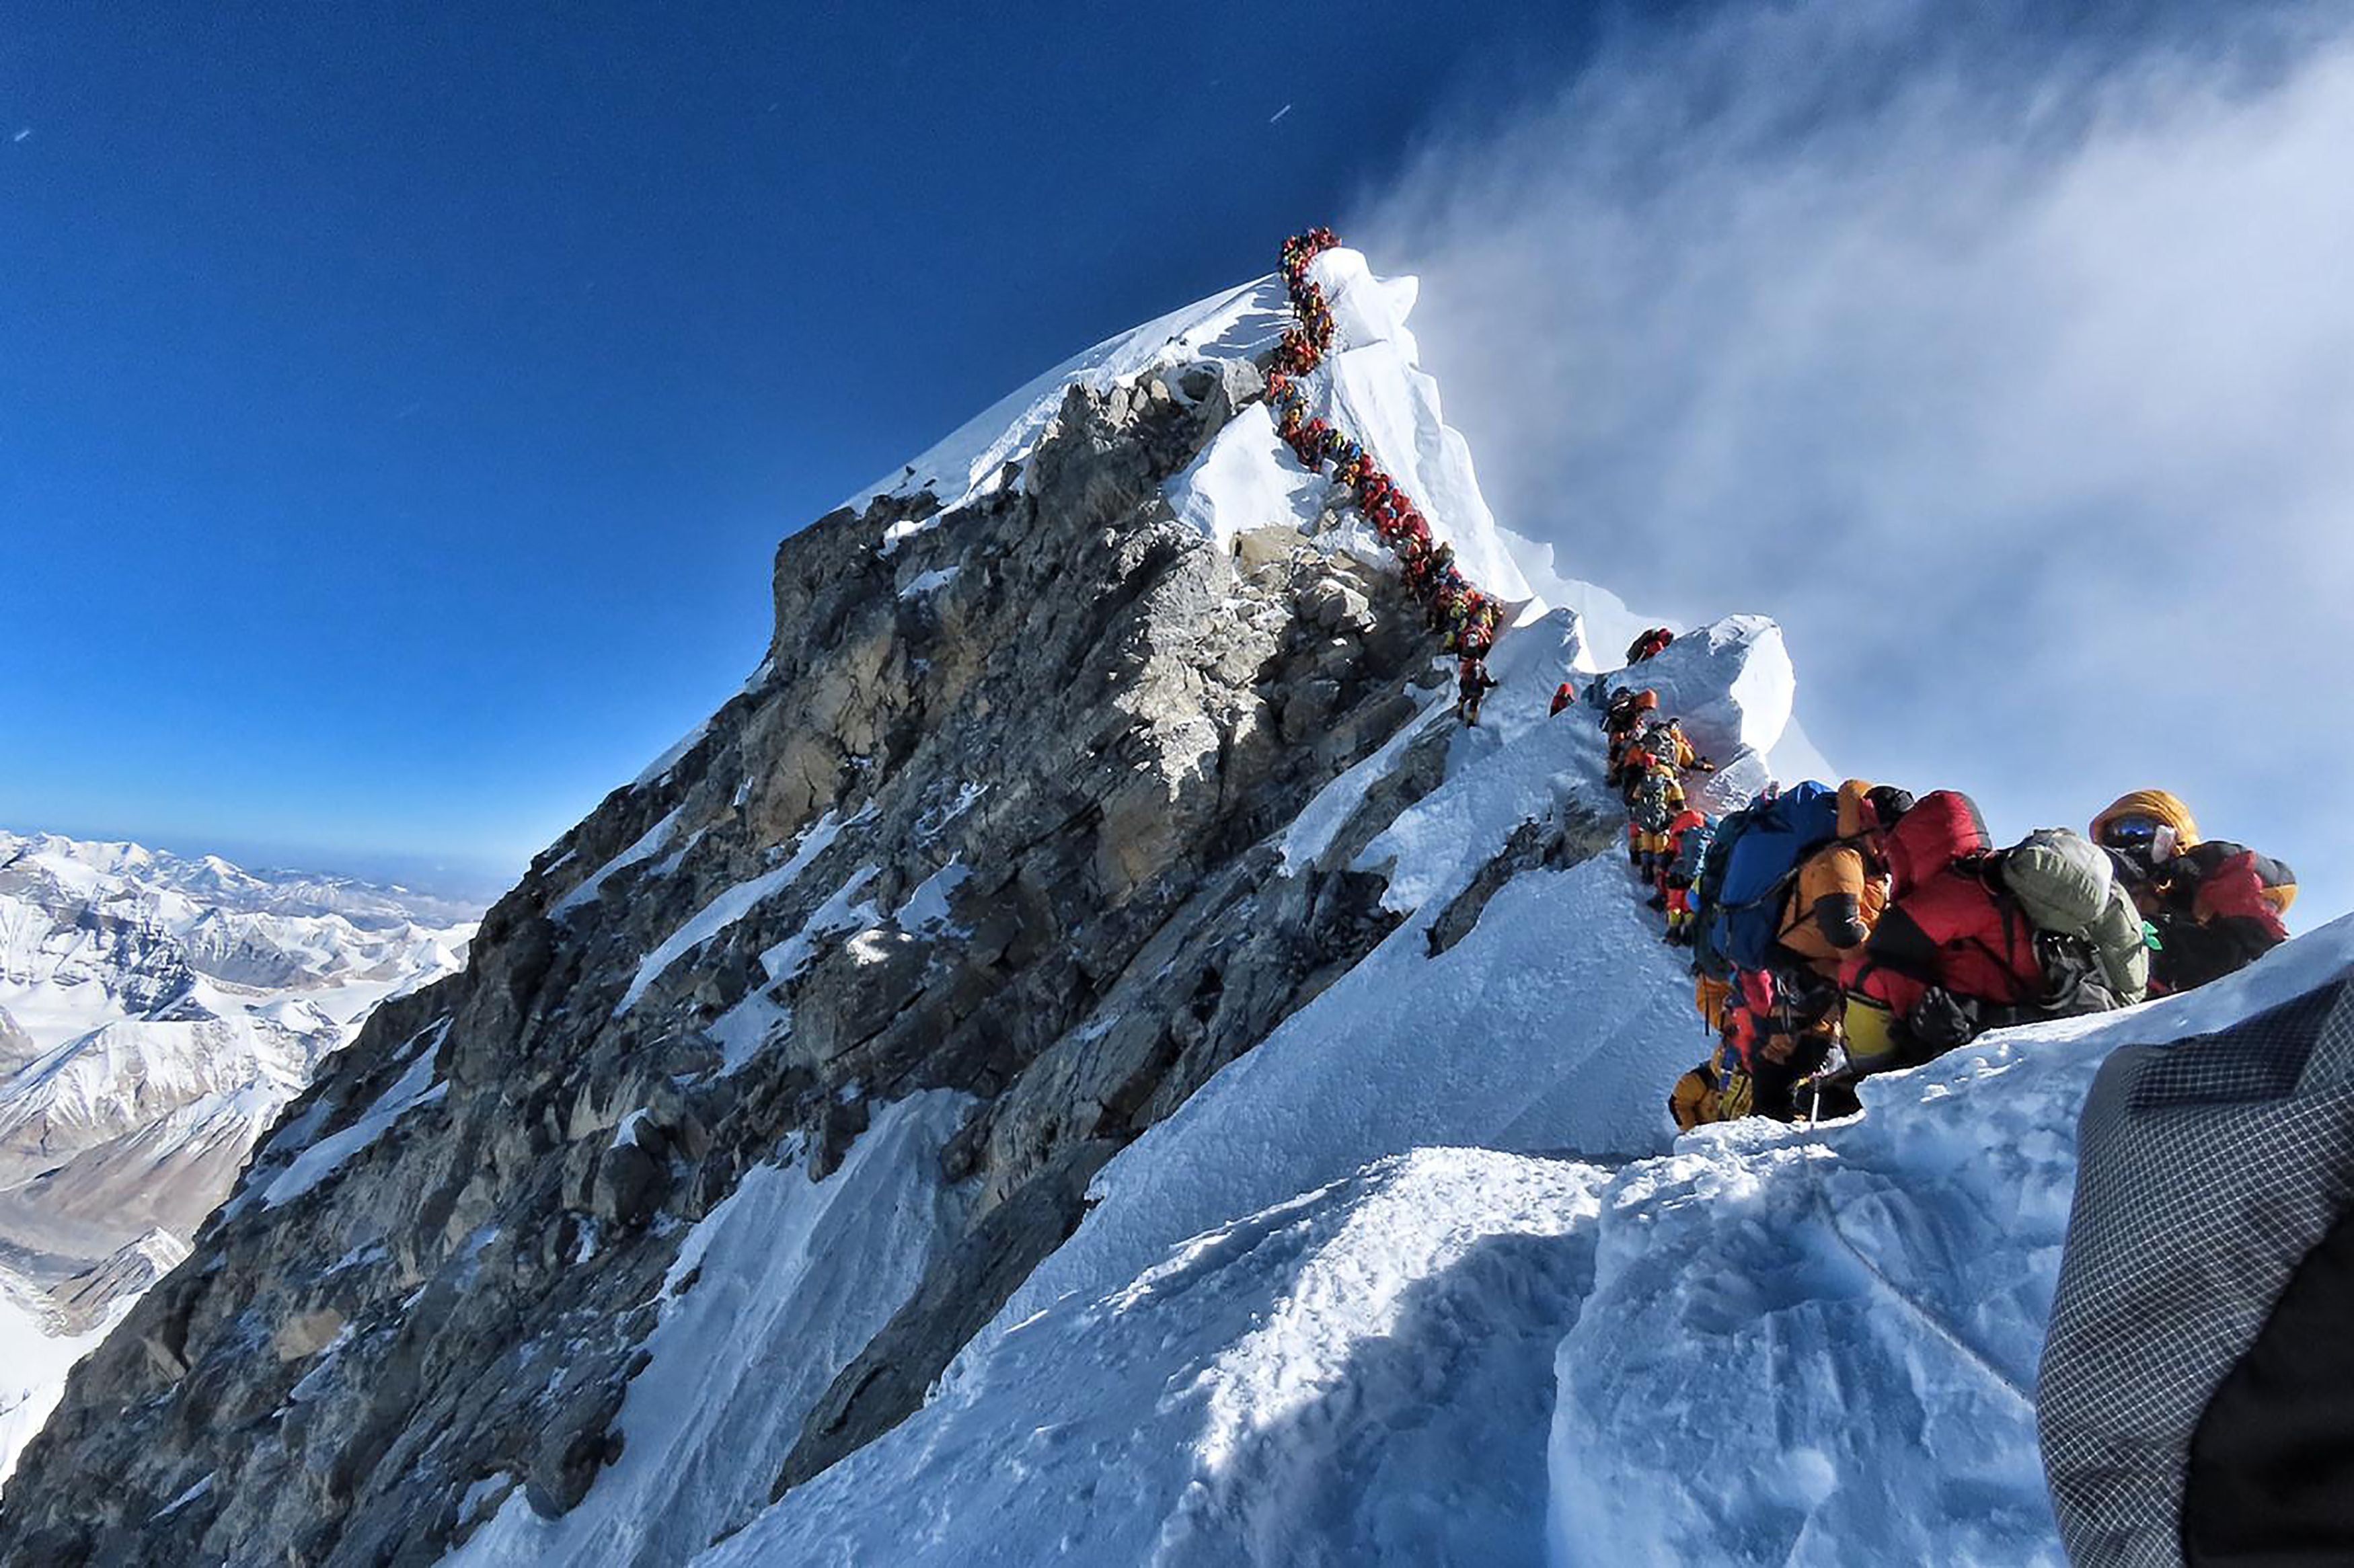 A photo by project possible showing an example of the queues to climb Mount Everest in recent years